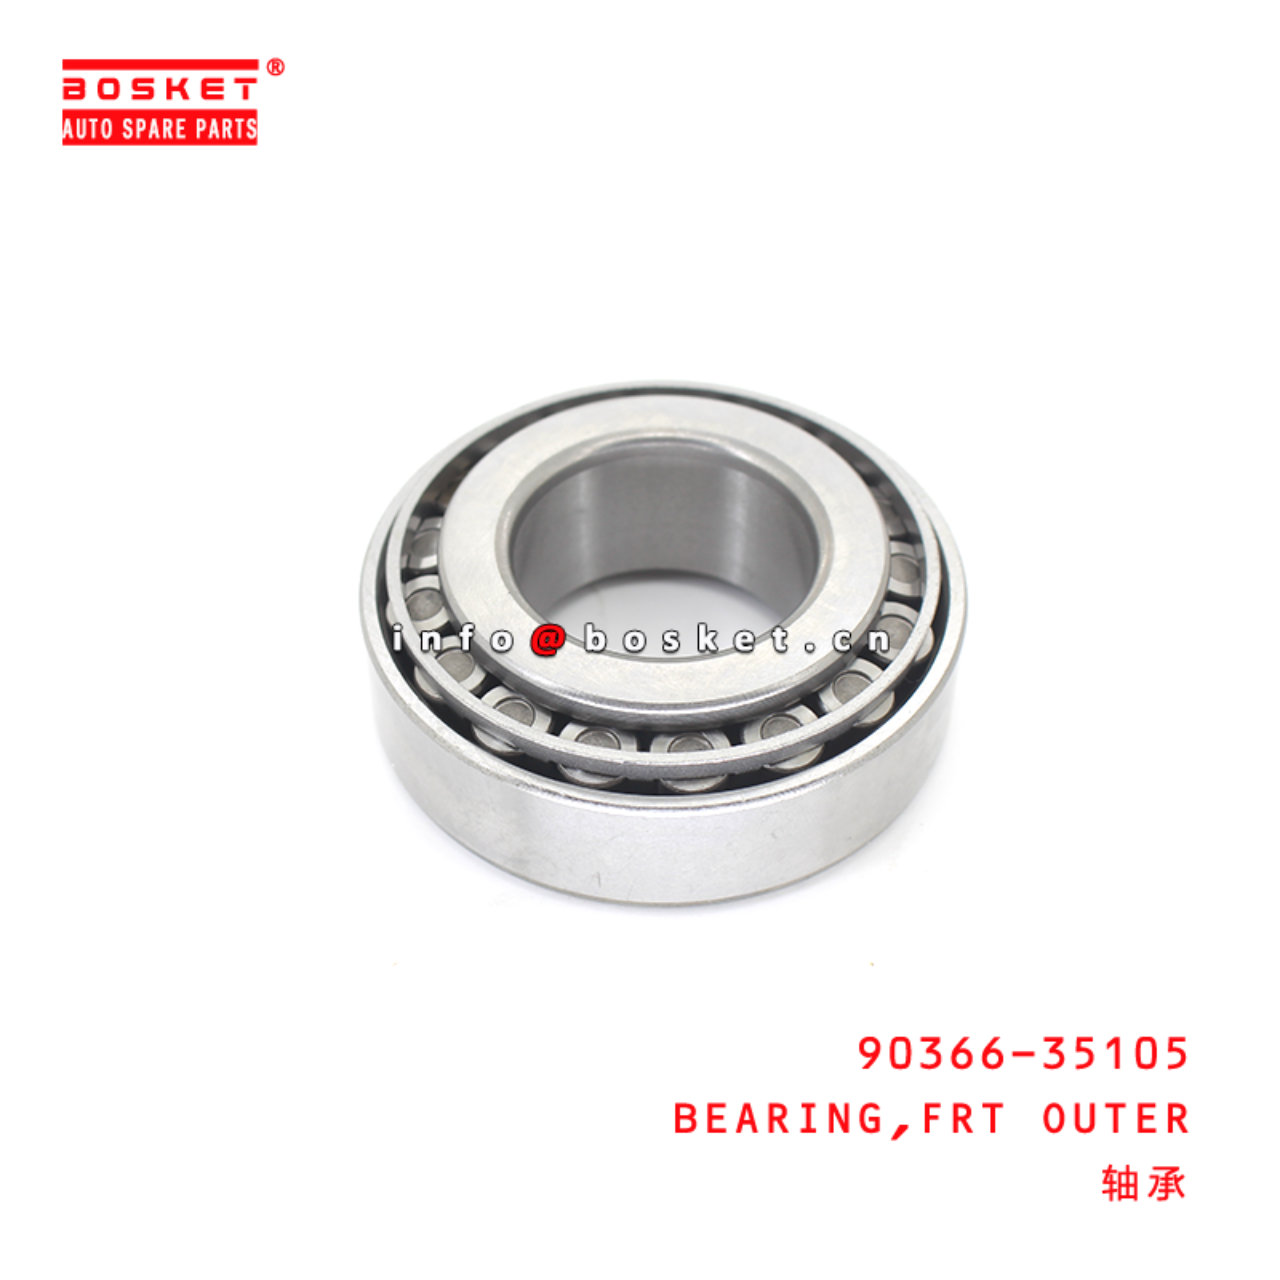 90366-35105 Front Outer Bearing Suitable for ISUZU HINO700